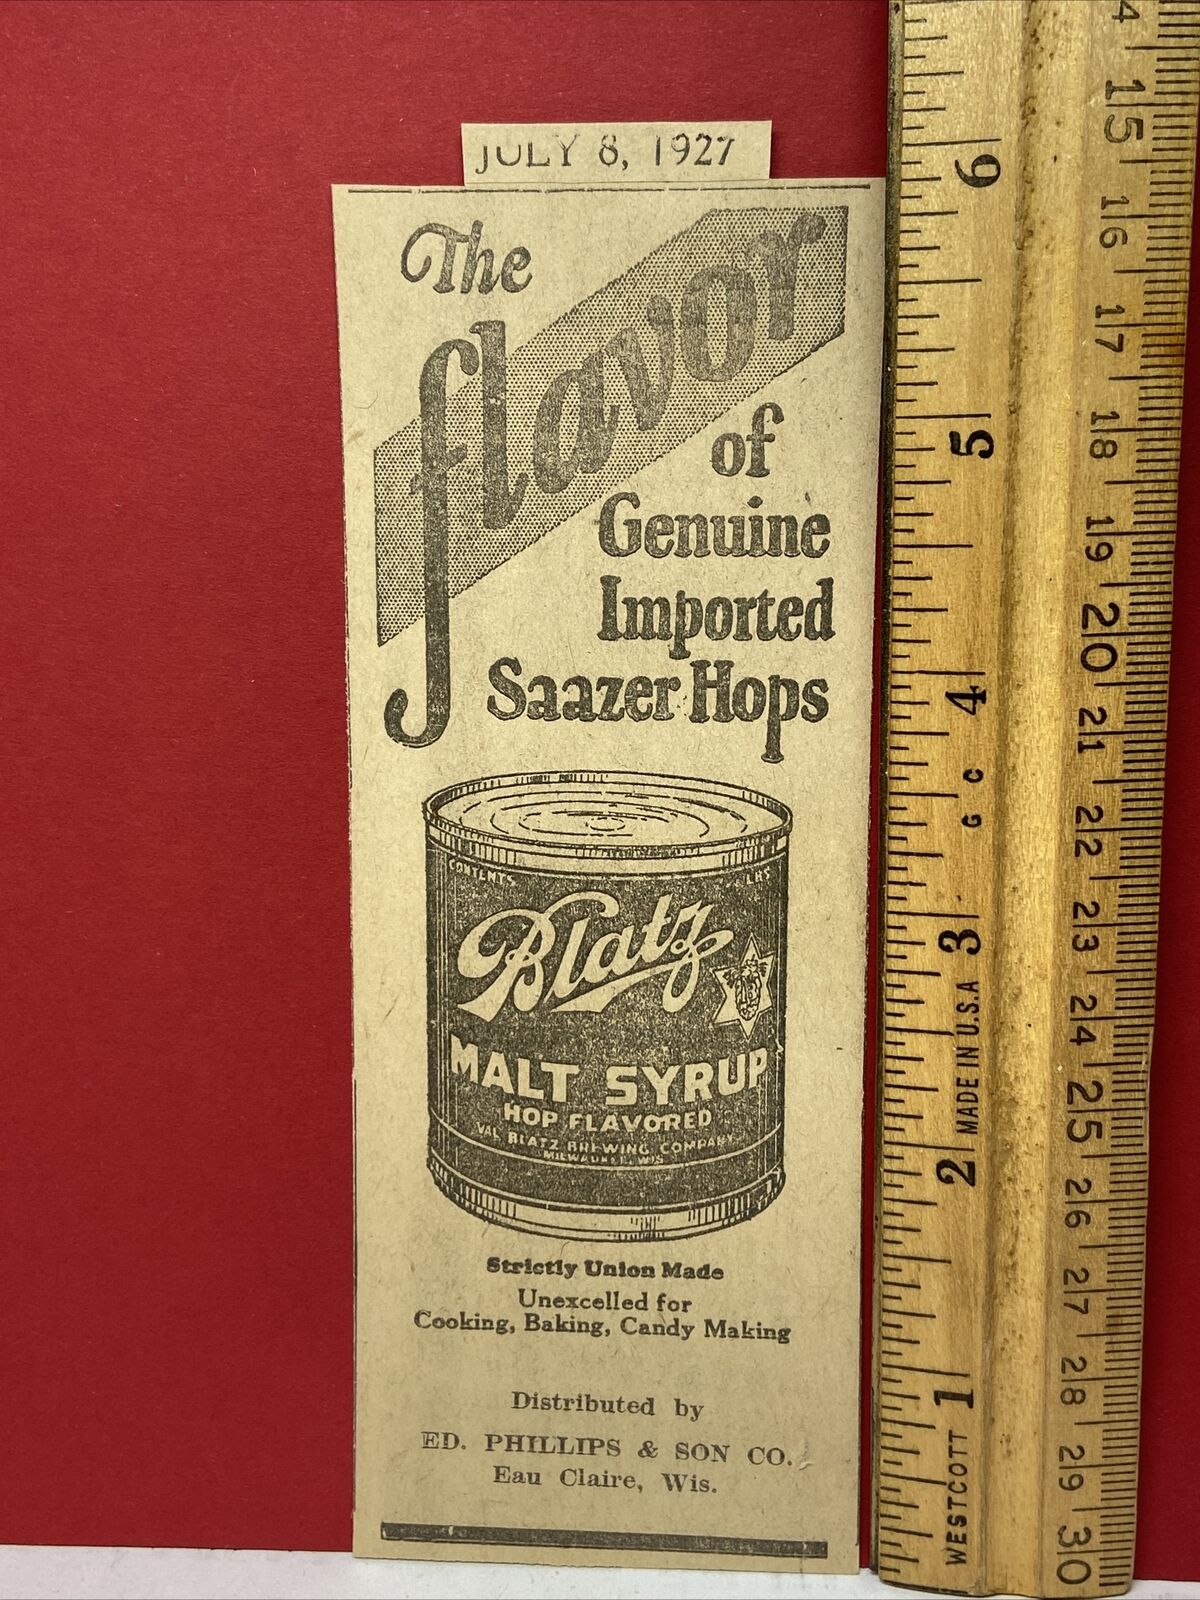 Old 1927 Advertising Ad Blatz Beer Malt Syrup Dealer Eau Claire Milwaukee Wi Wis